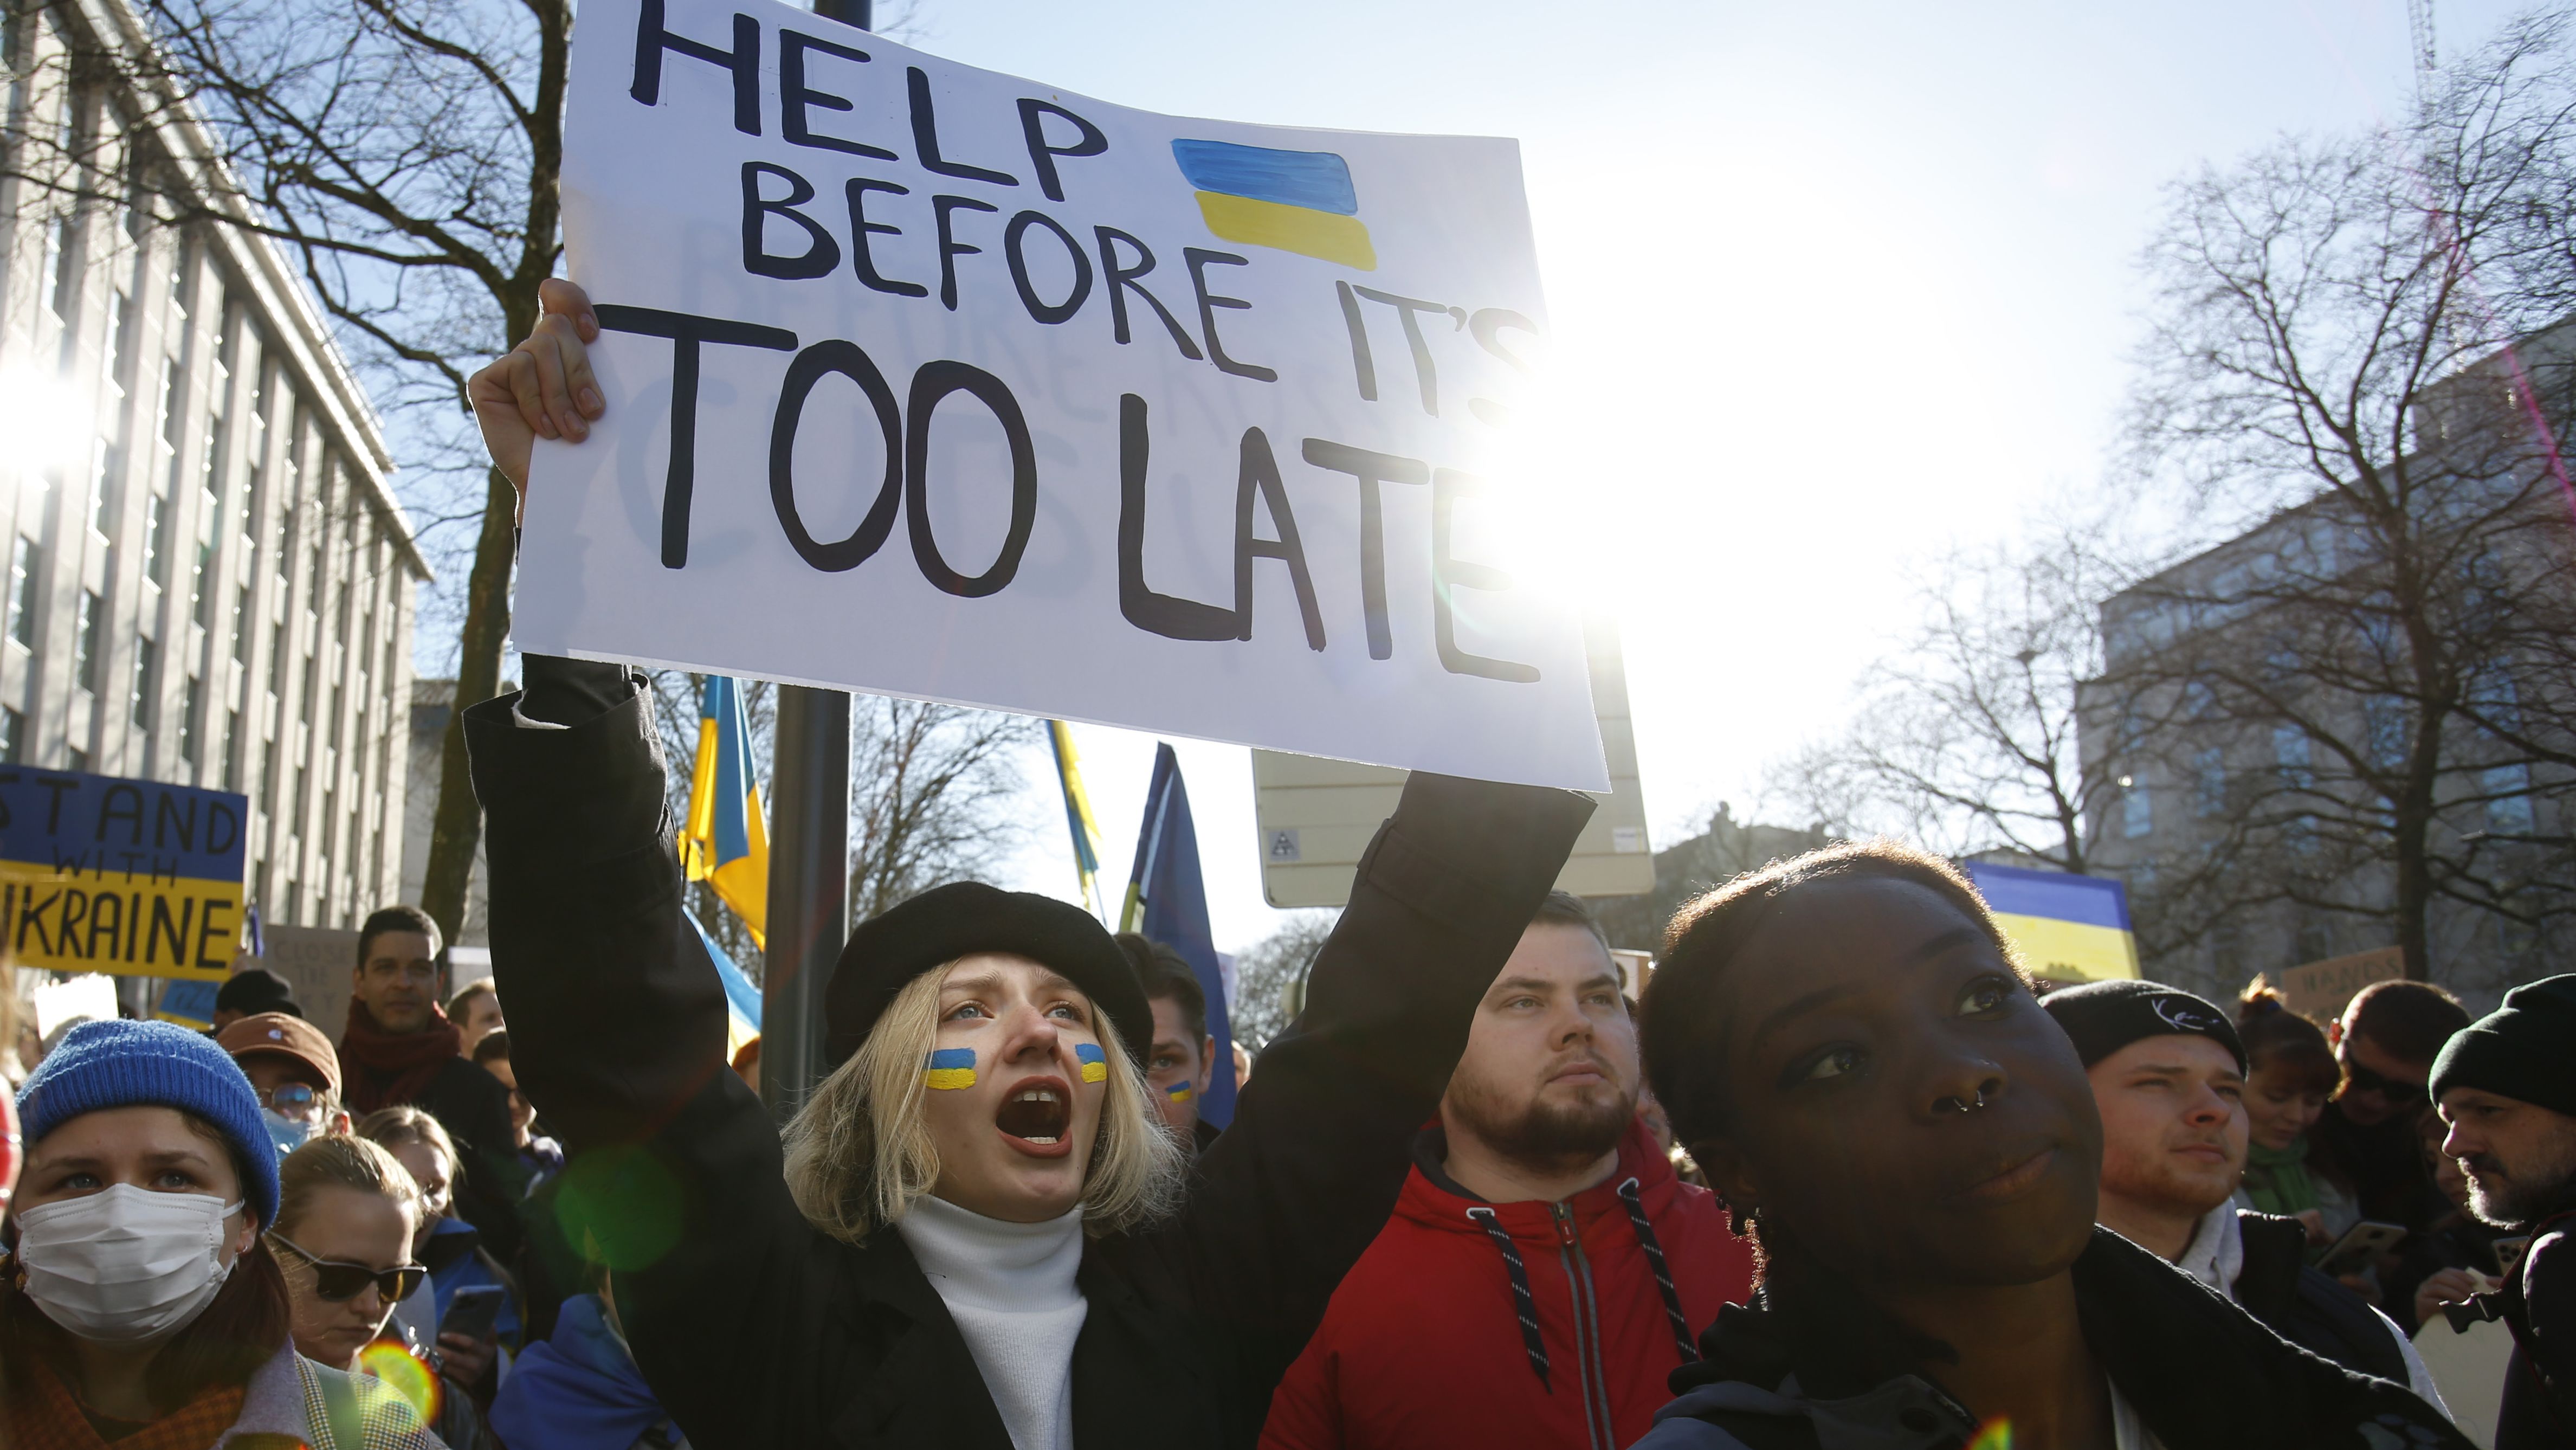 A protester holds a sign that says "help before it's too late" during a rally in Brussels, Belgium, on February 26.